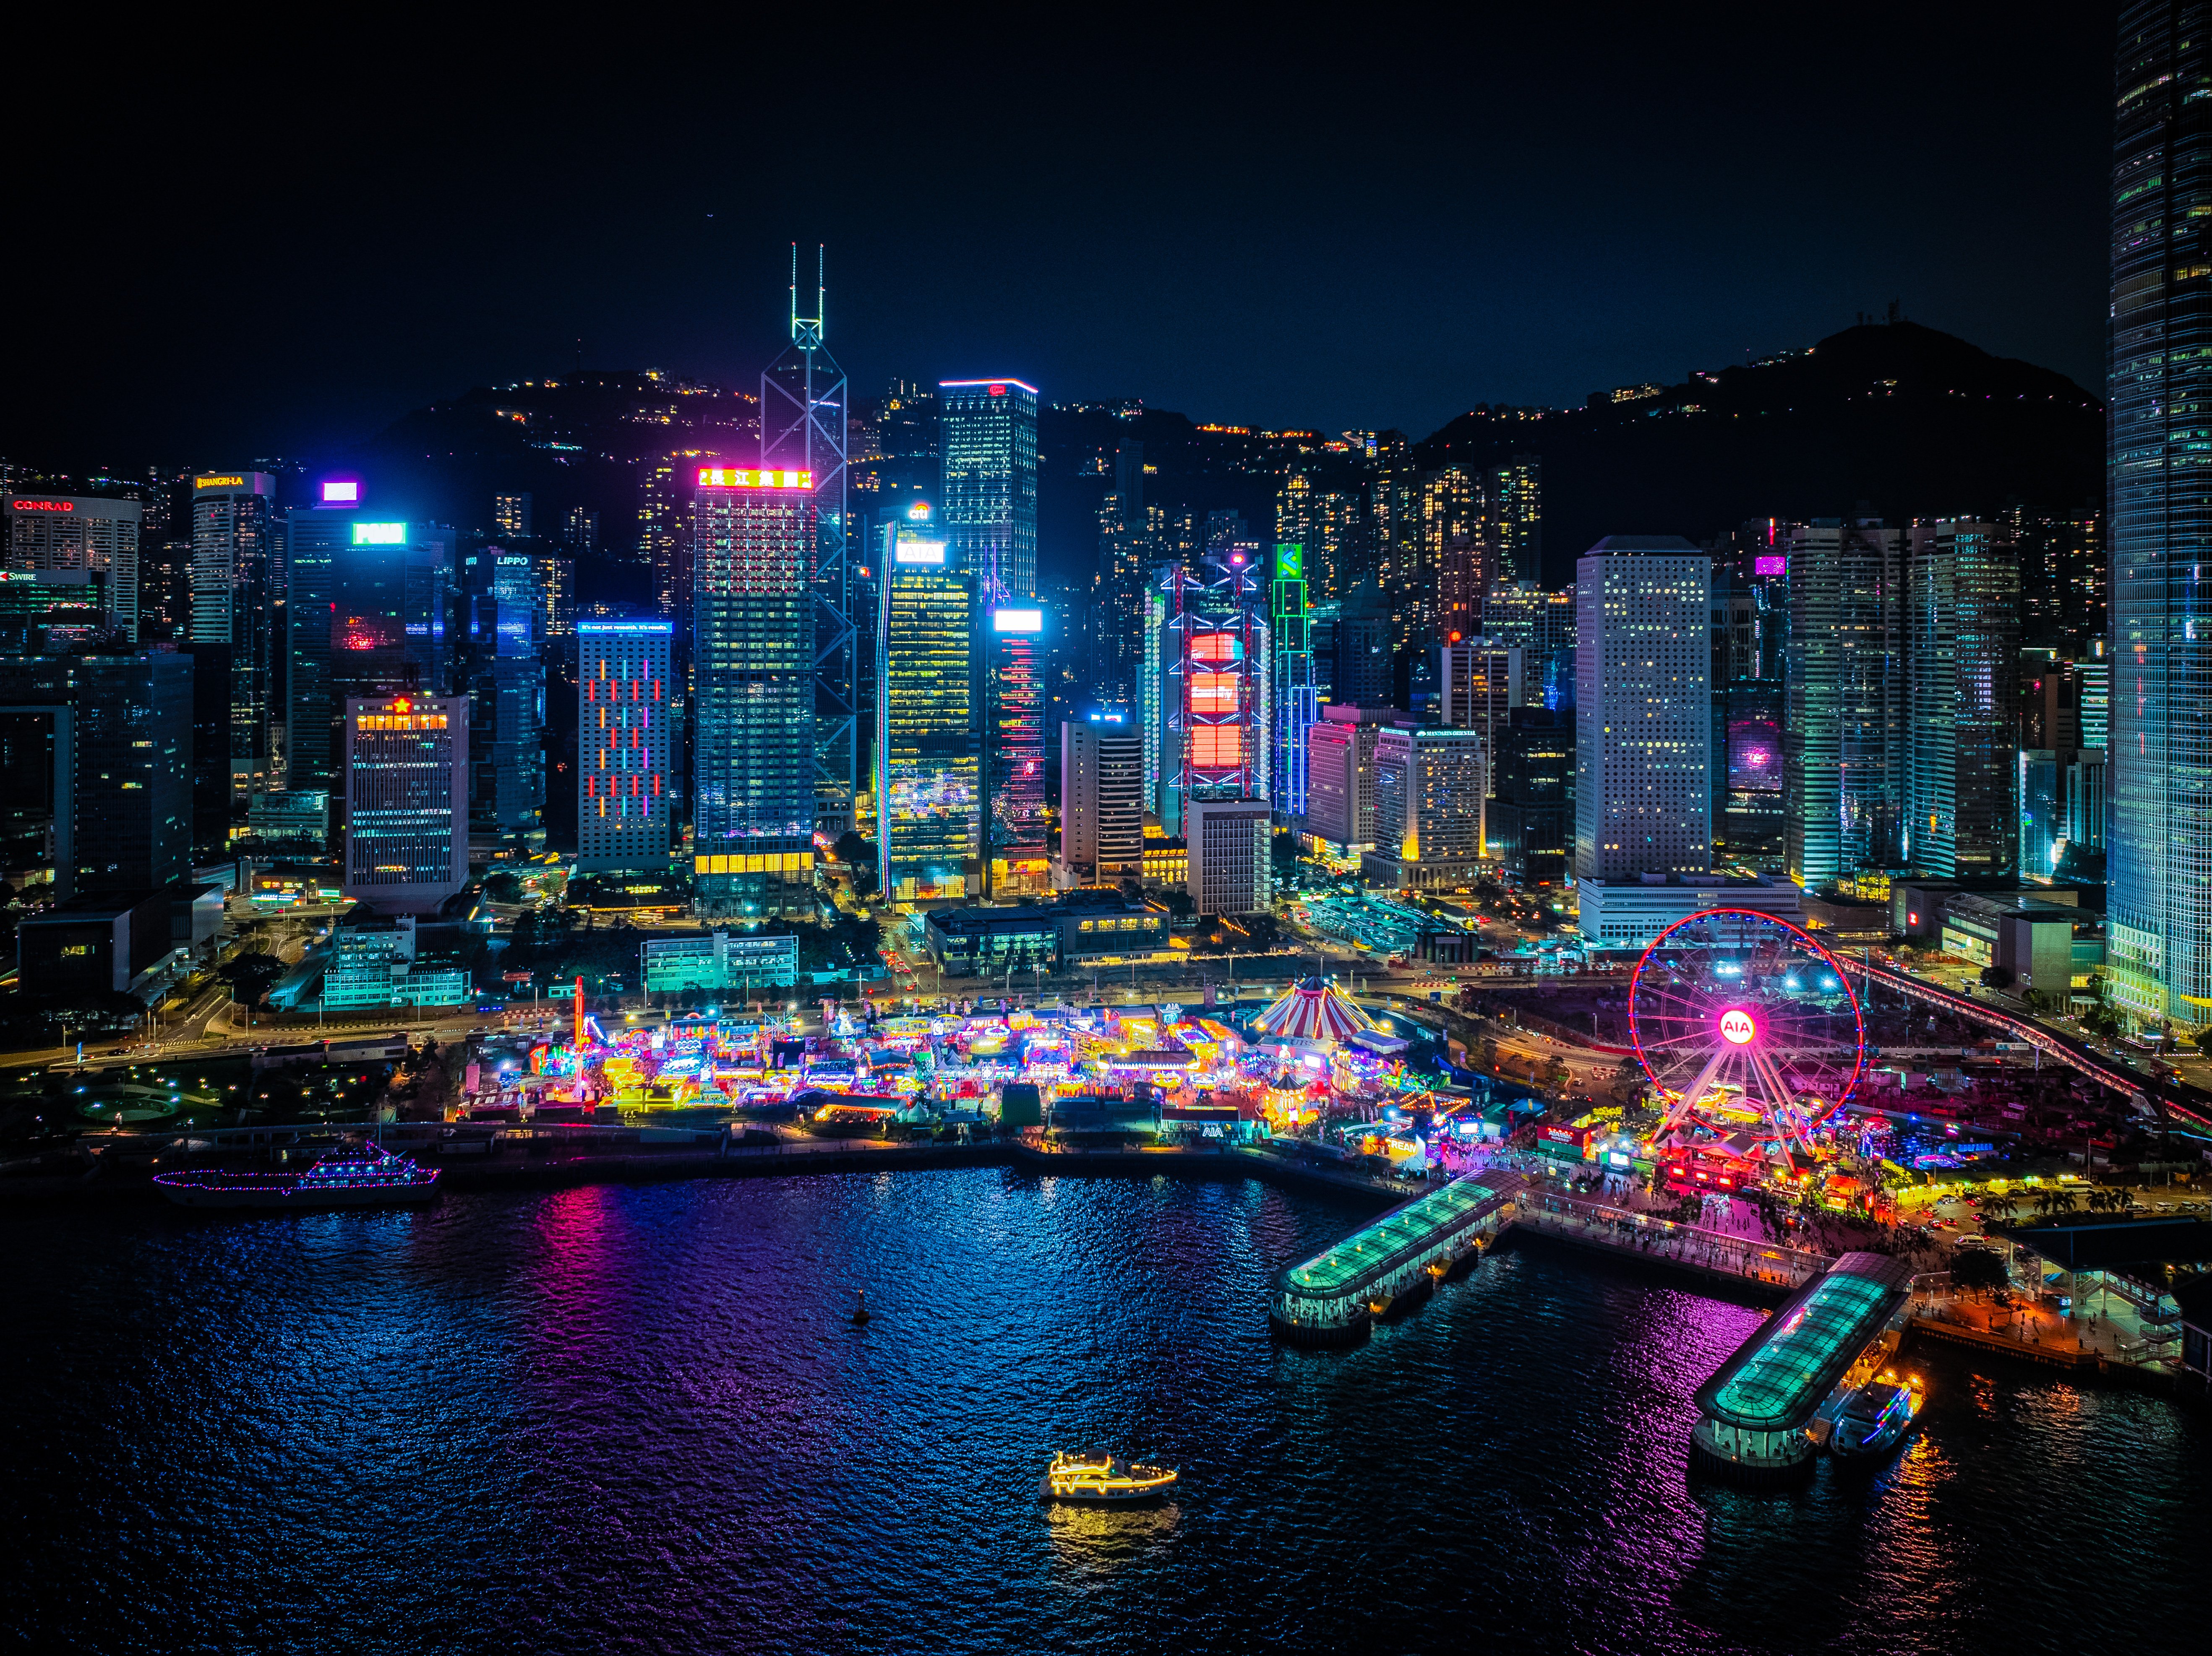 A bigger and better AIA Carnival has brought more joyous moments to Hong Kong.